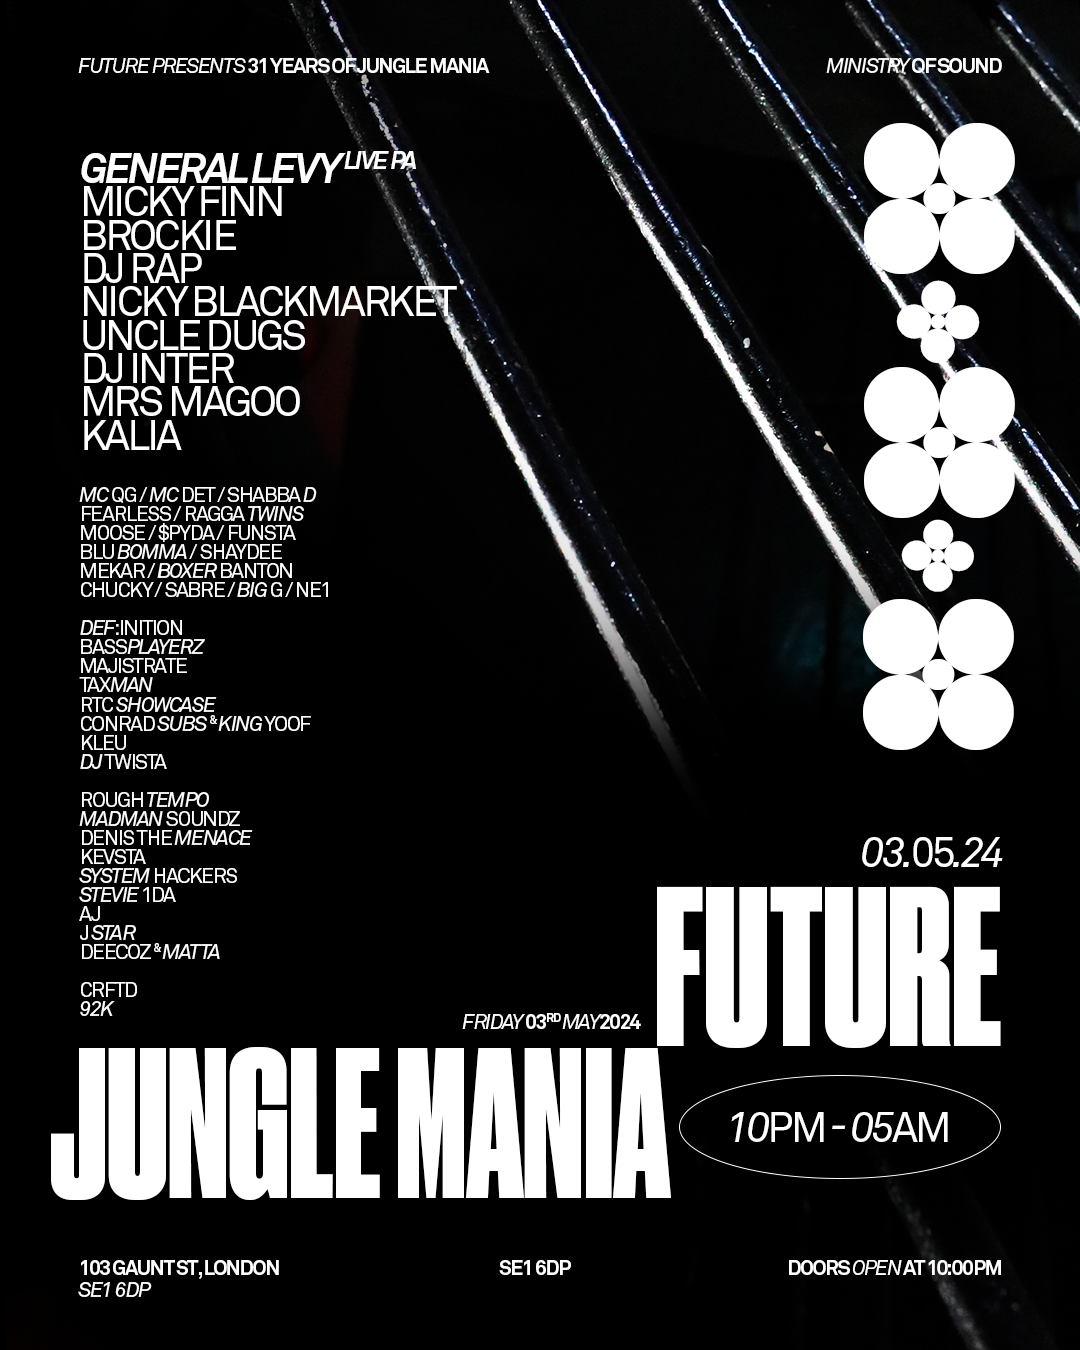 FUTURE x 31 Years of Jungle Mania: General Levy, BassLayerz, Micky Finn - フライヤー表